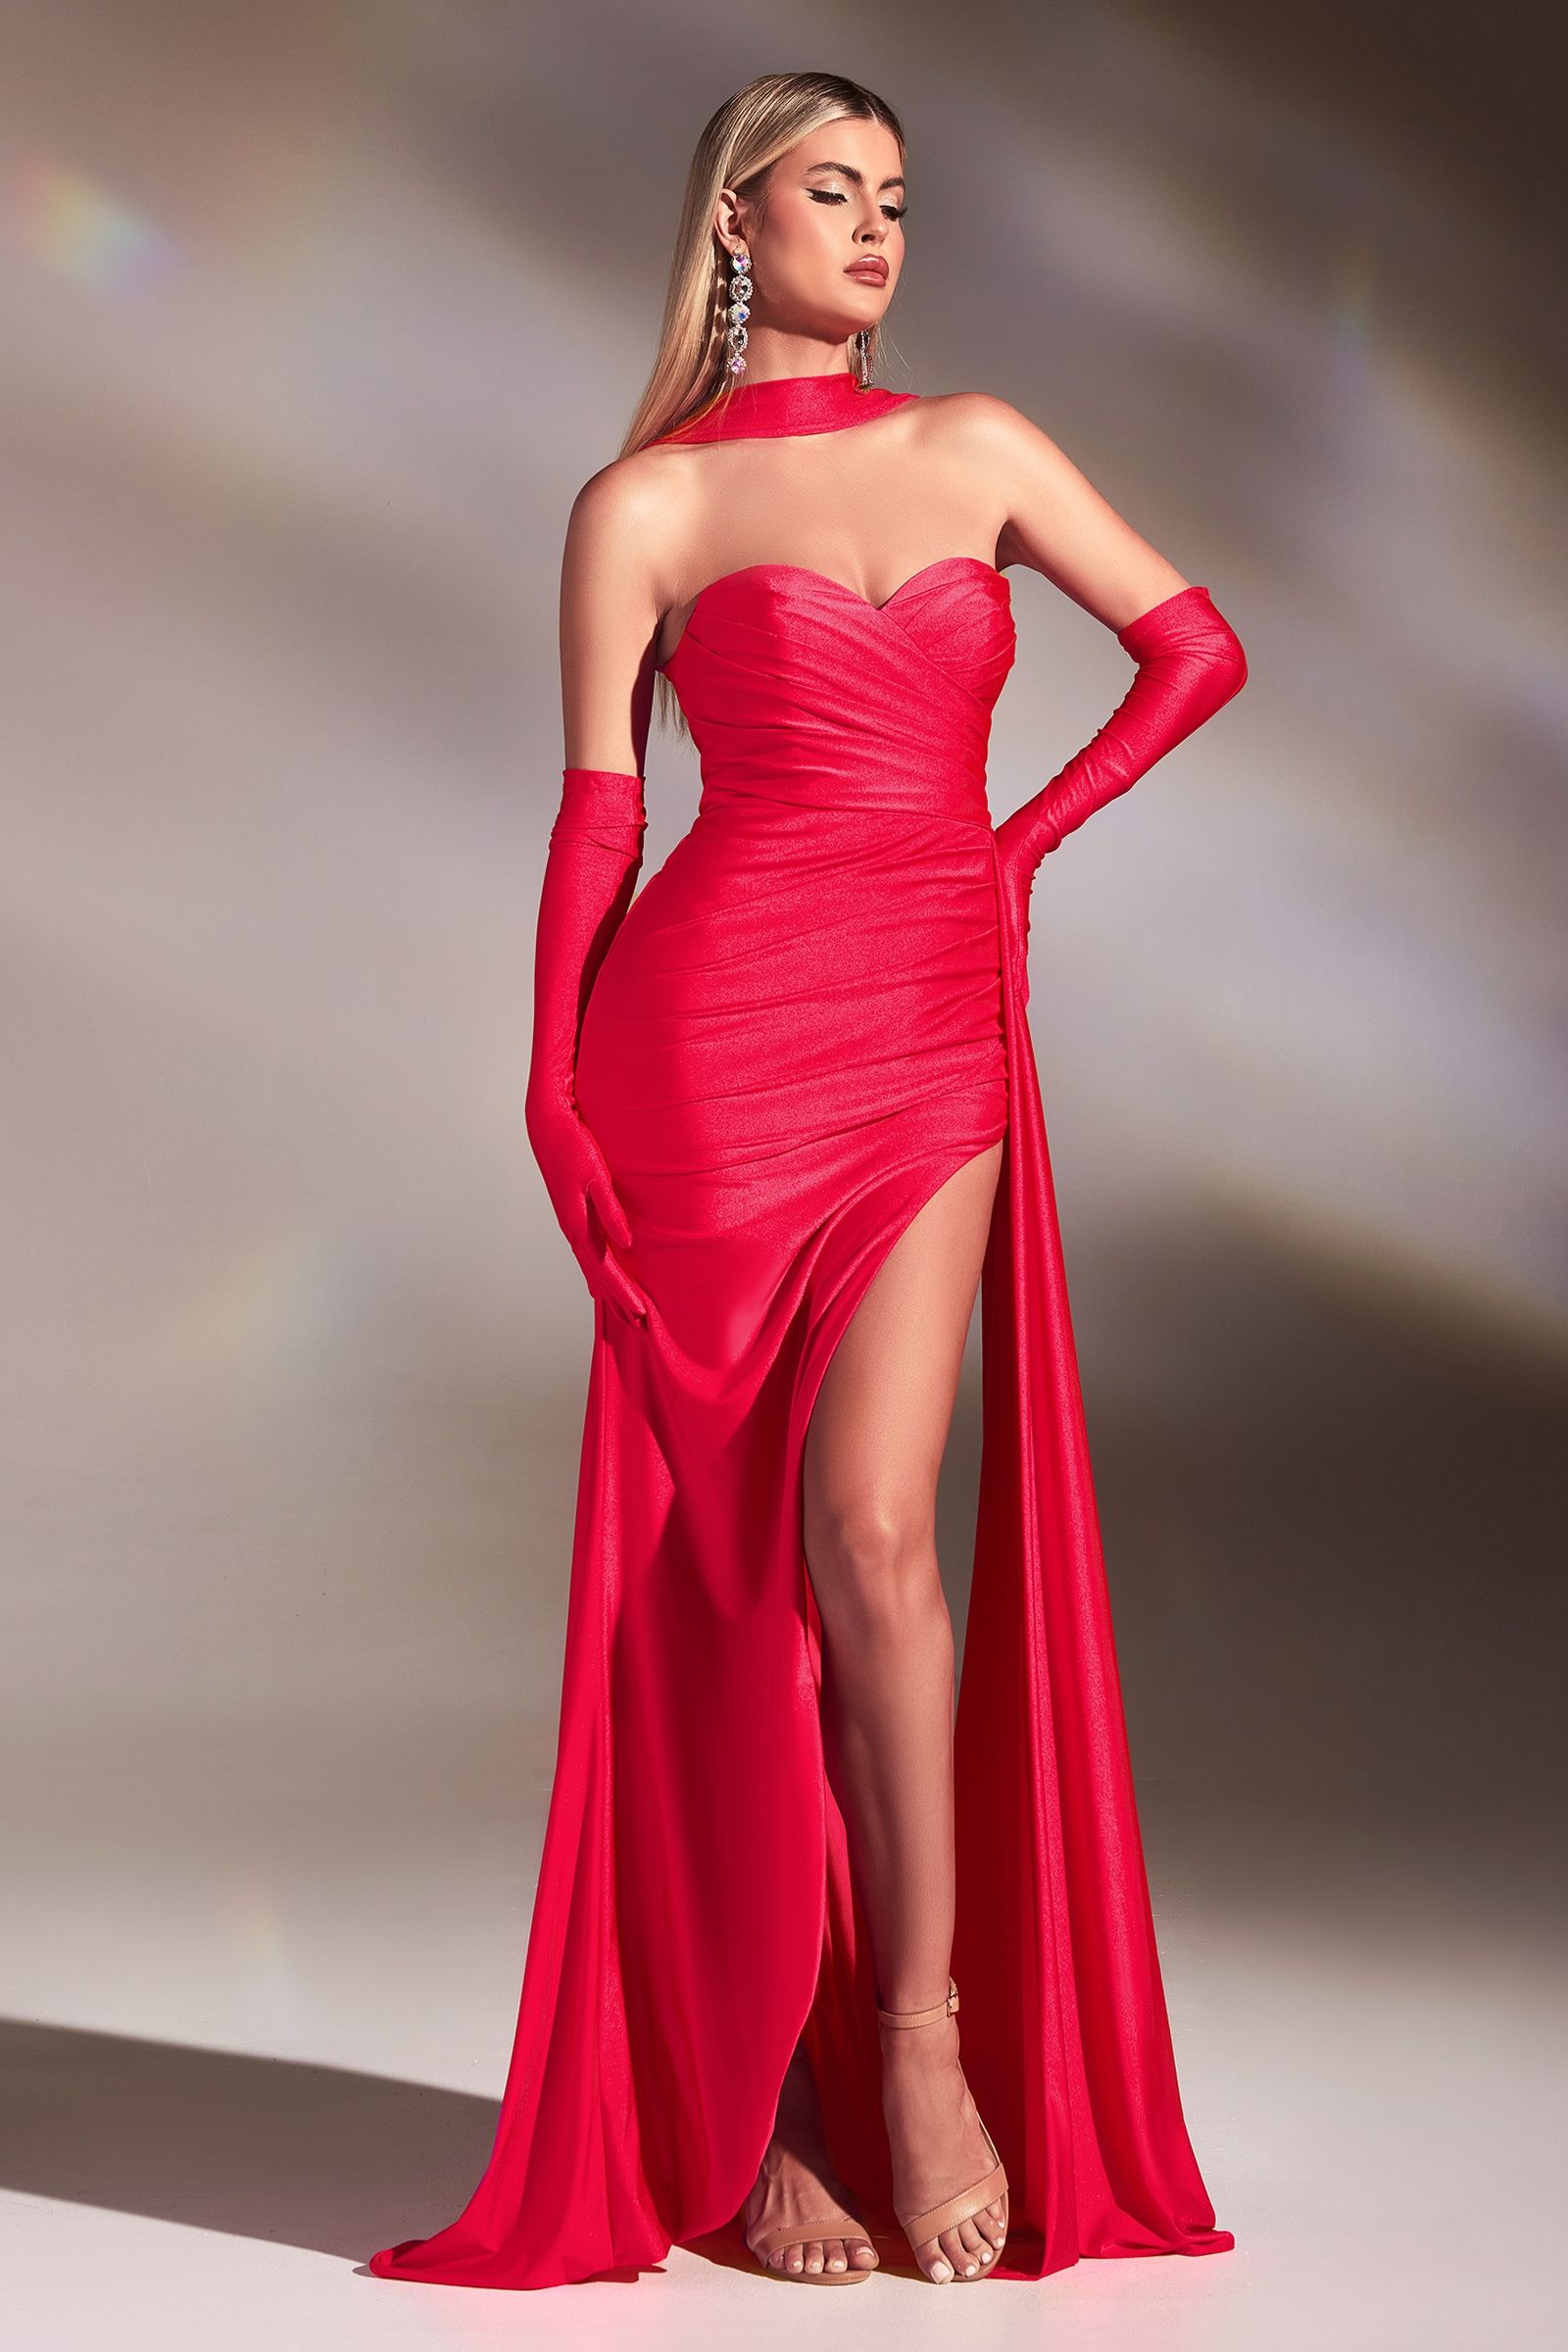 Luxury Satin Formal Dress; Gala Prom & Evening Gown; Strapless Sweetheart Bodice; Gloves Included-smcdress